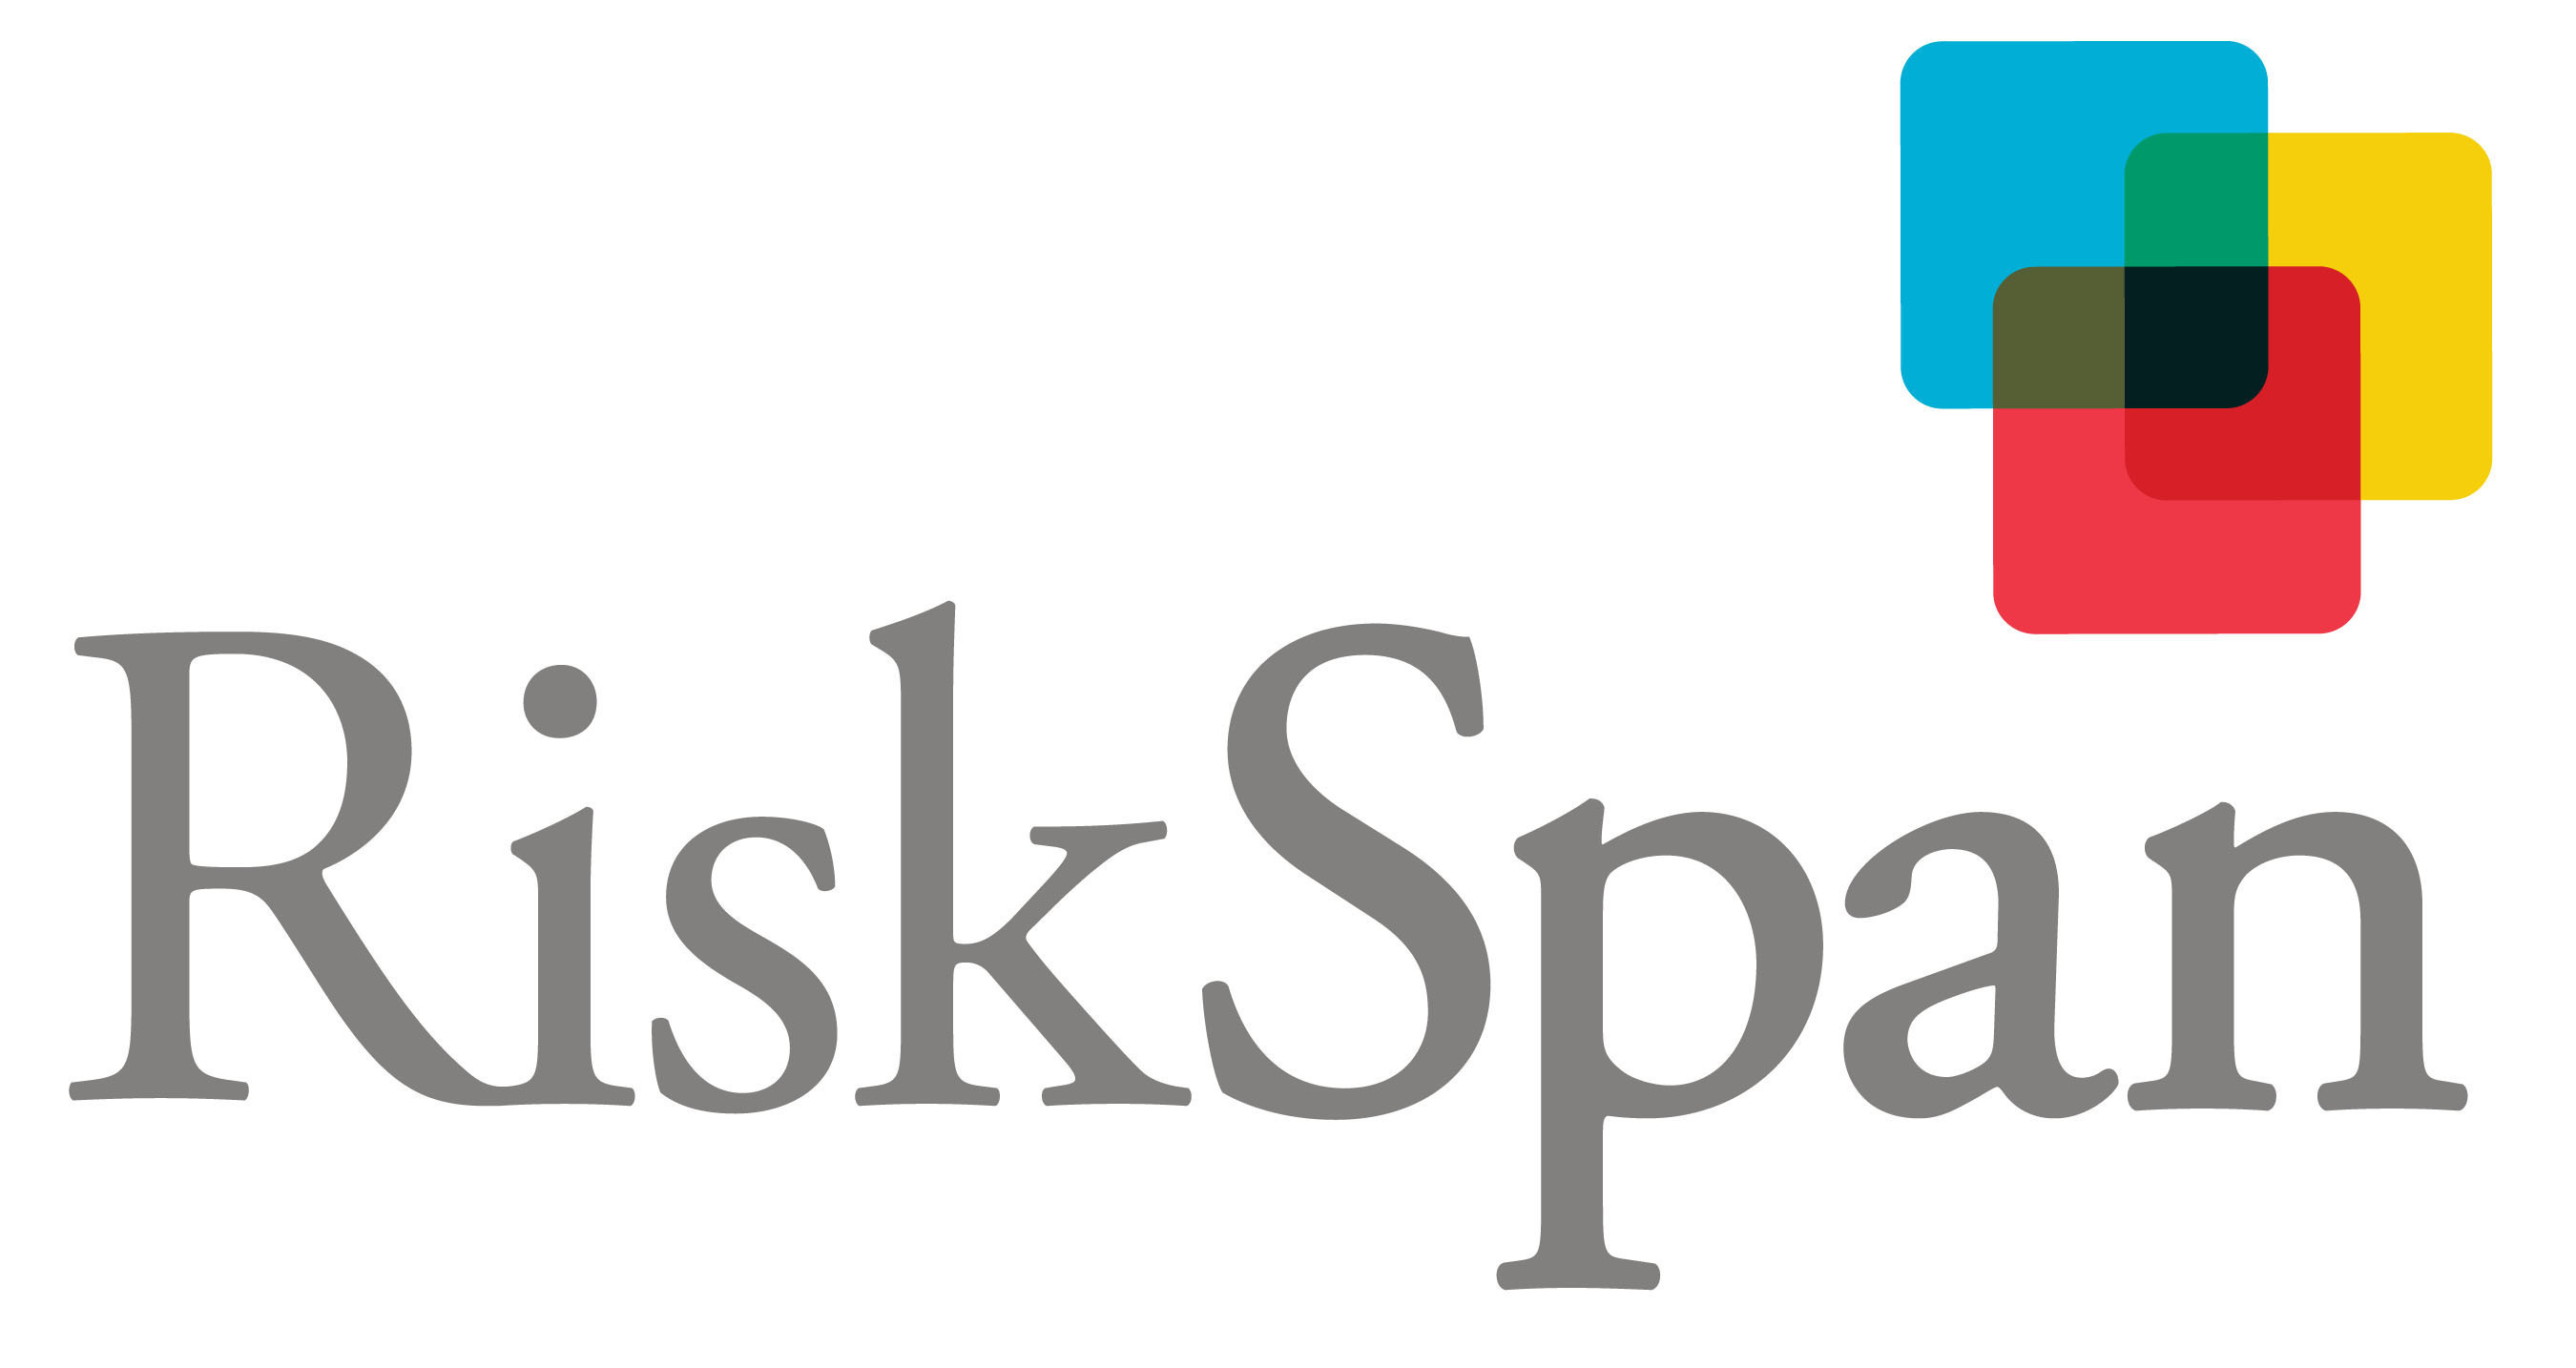 RiskSpan Delivers Solutions through Data and Analytics. RiskSpan combines business expertise and technical skills to deliver solutions through the efficient use of data, technology and tools.